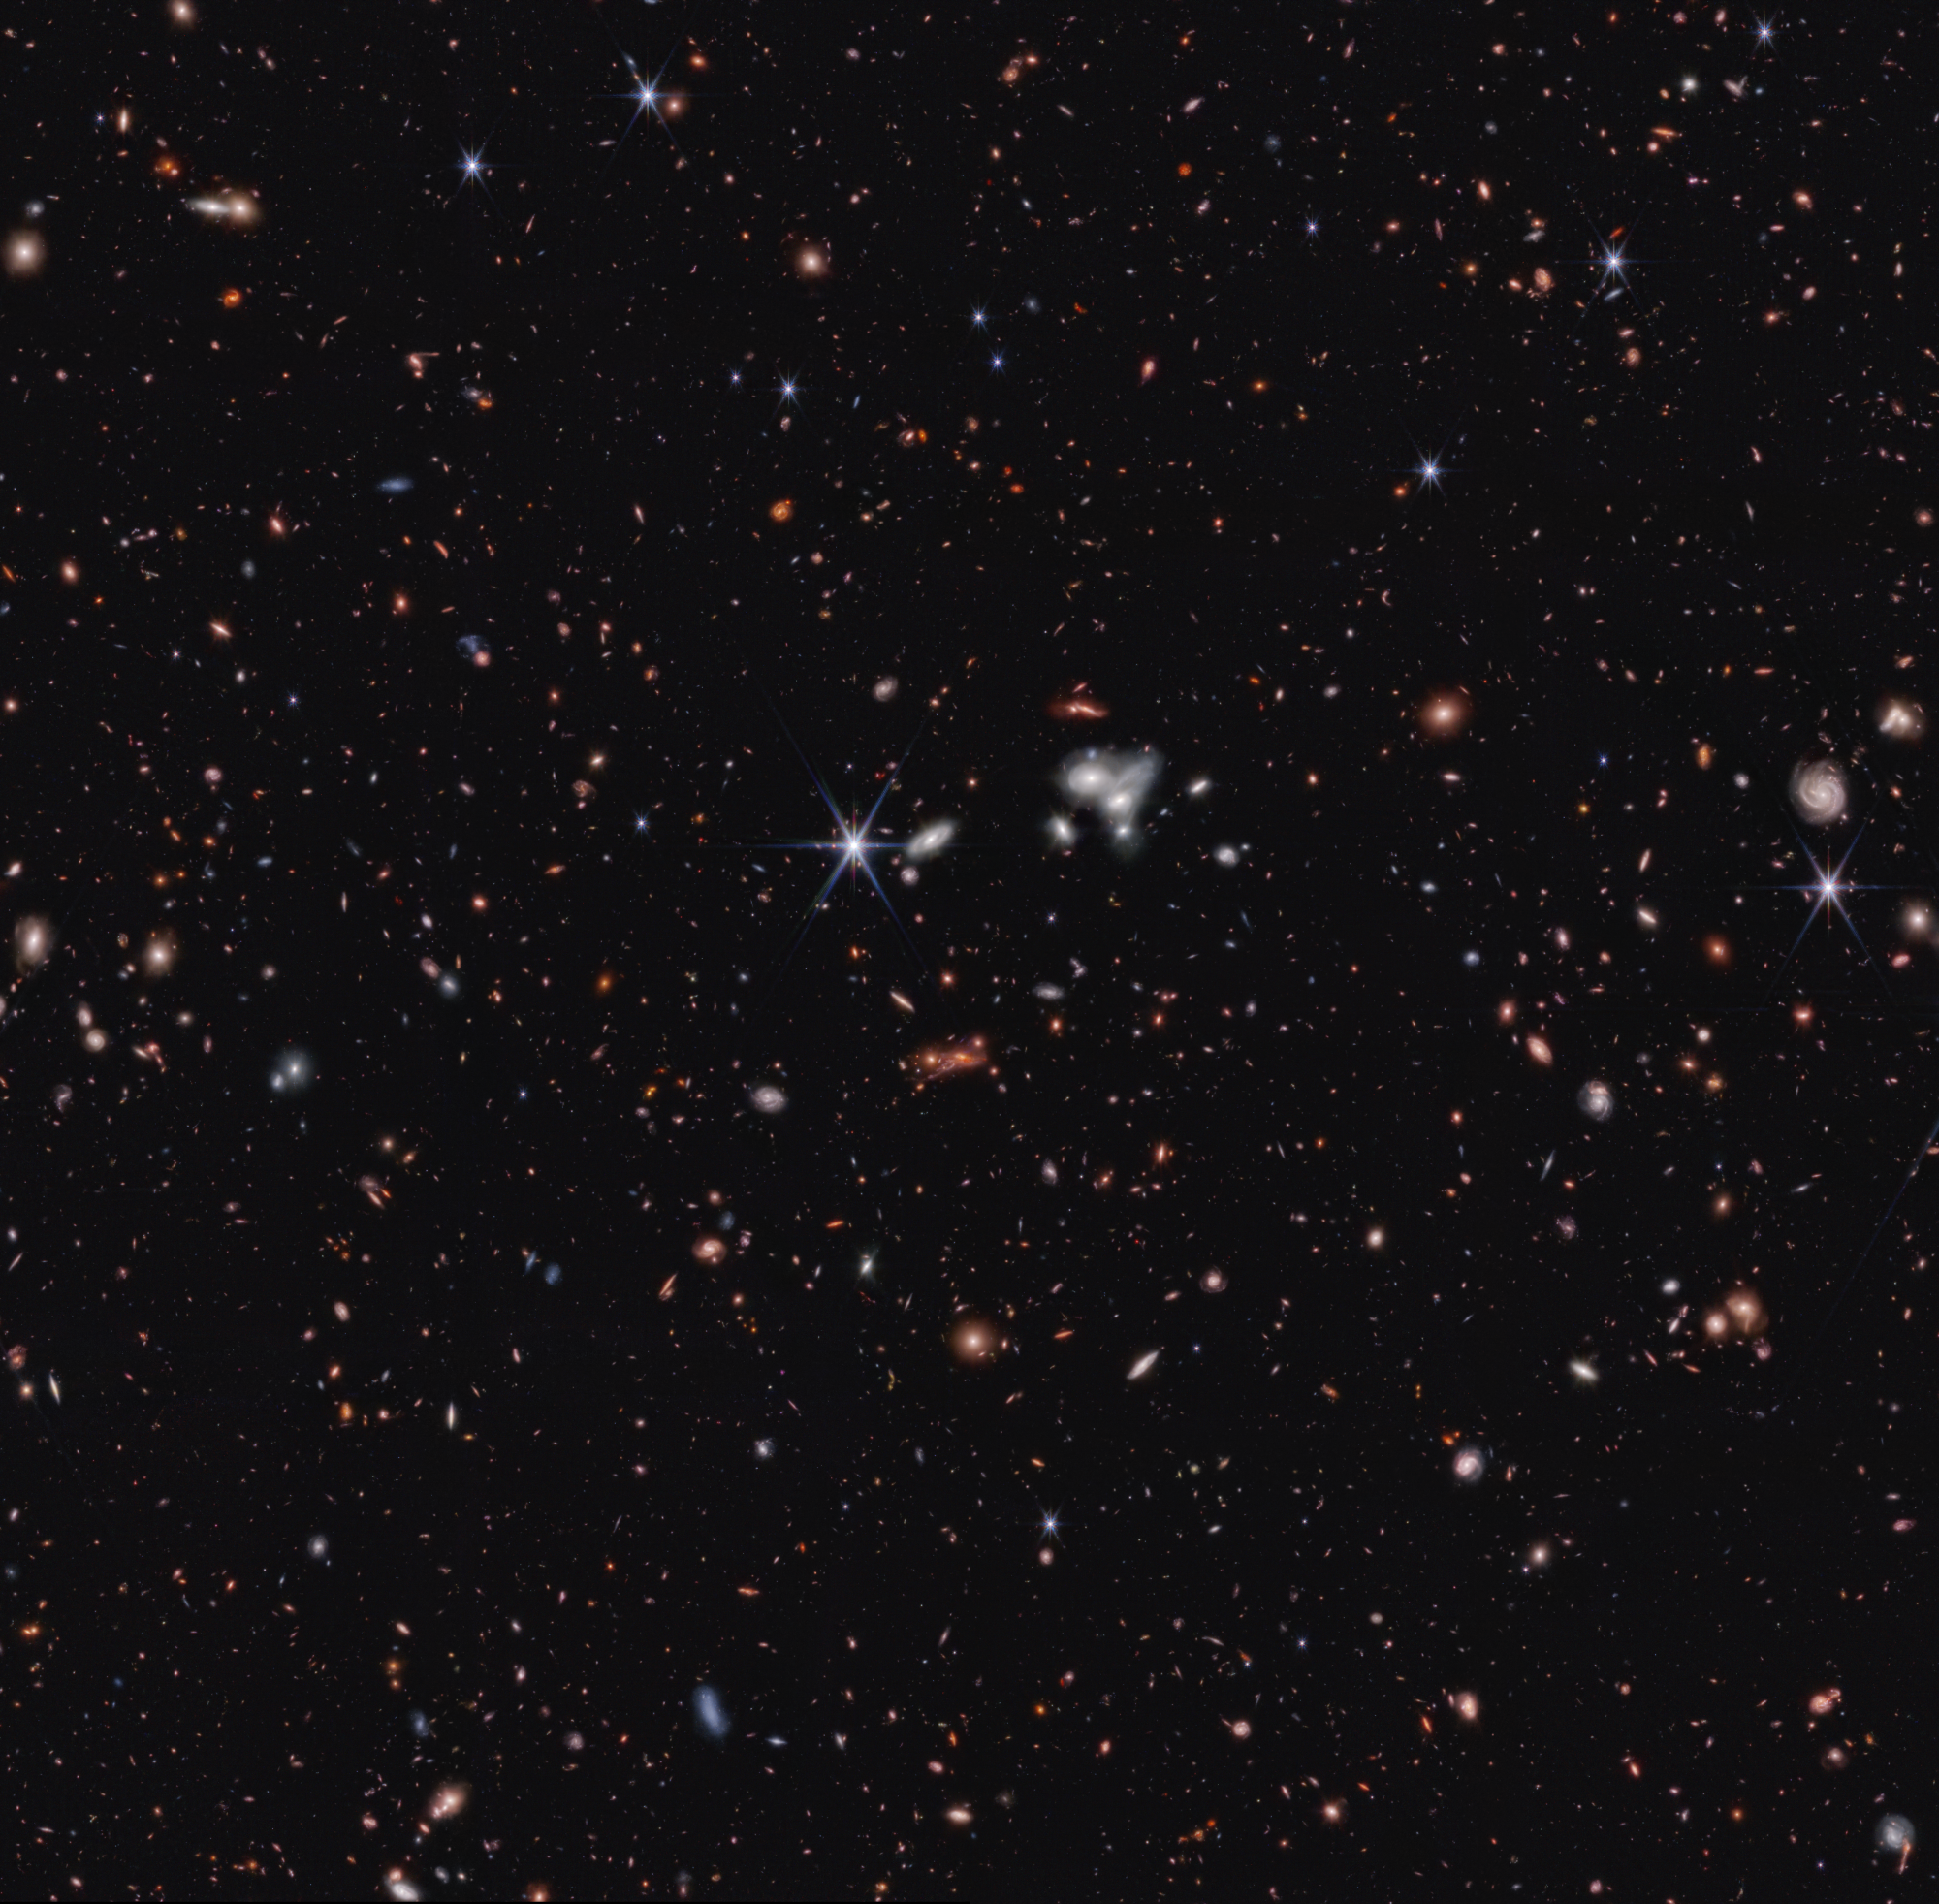 Image of a JWST deep field, showing a lensed cluster of galaxies containing the early black hole CEERS 1019